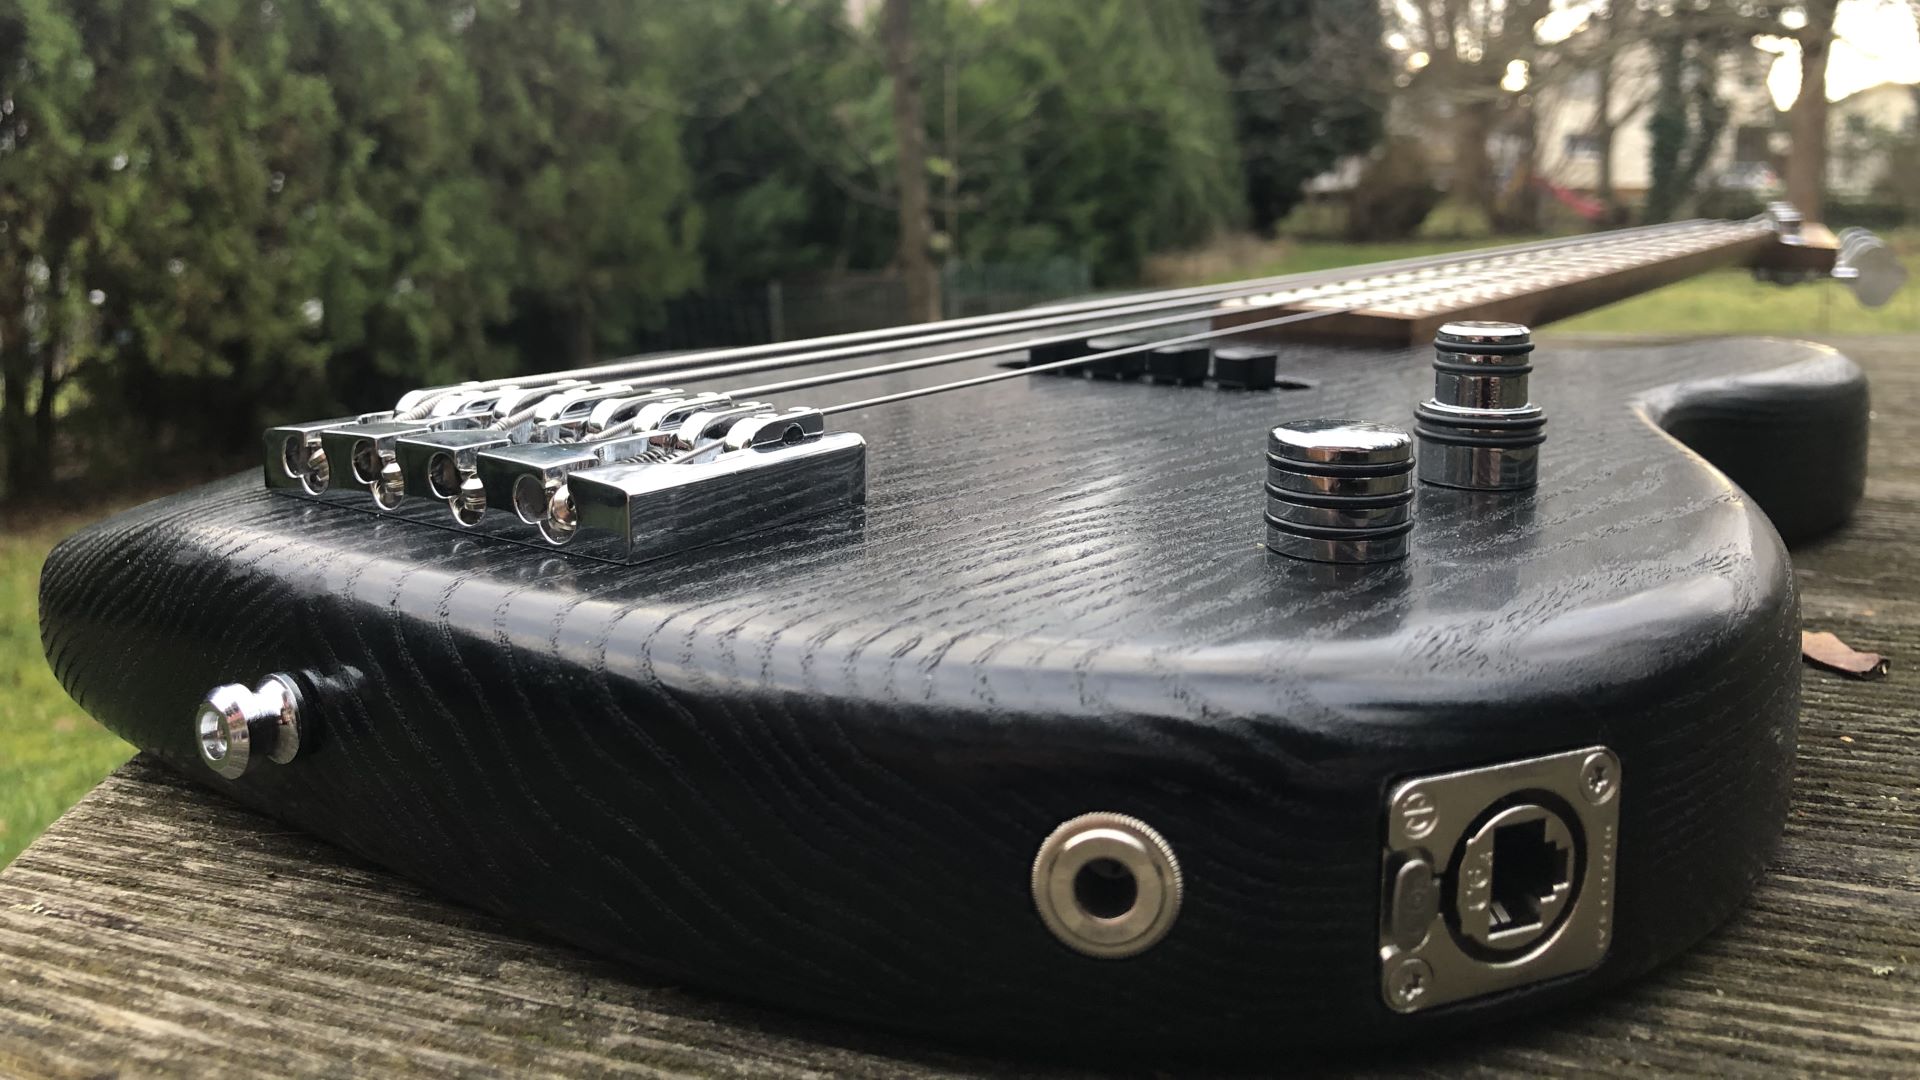 Low-angle photo from slightly above the side jacks of a finished bass guitar. The chrome-plated hardware is installed. The bass has two control knobs, one regular, one stacked.